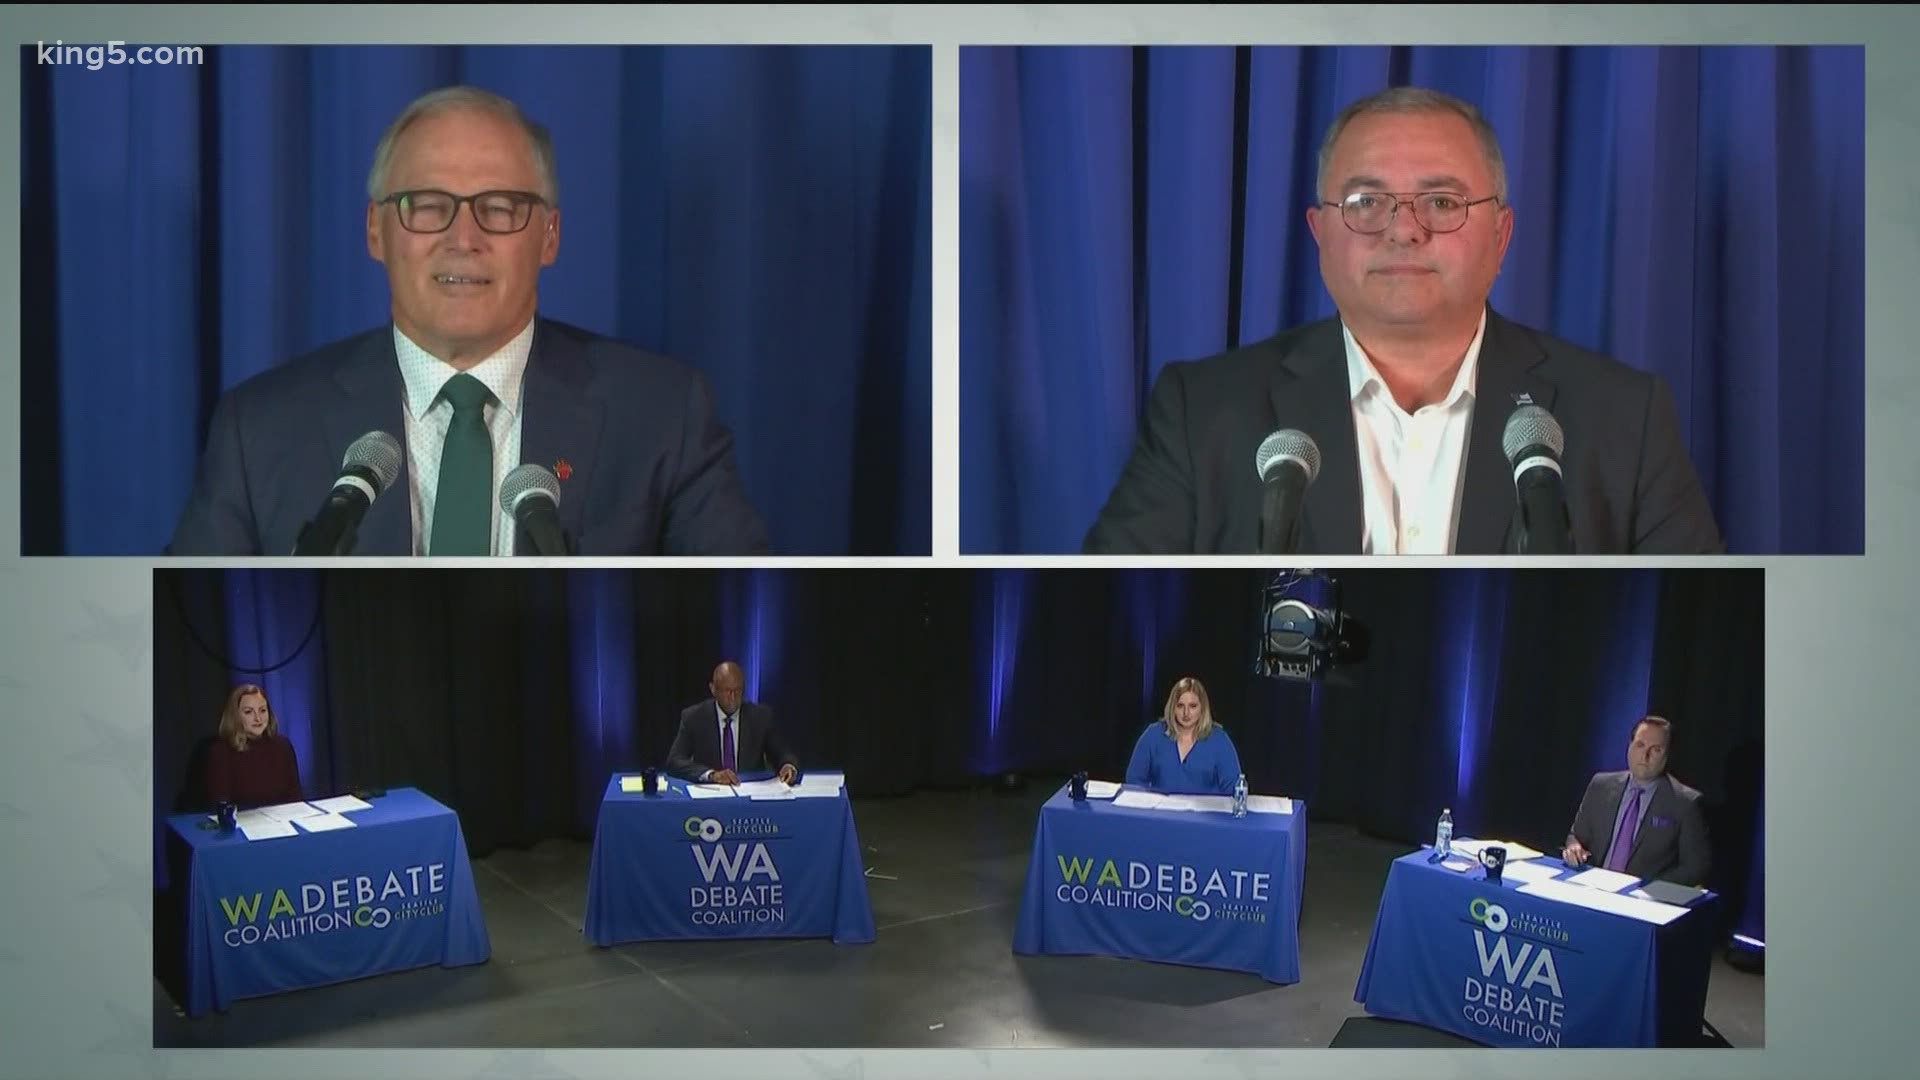 KING 5 spoke with from Washington Gov. Jay Inslee and GOP challenger Loren Culp after their only scheduled debate, which aired live on Wednesday.